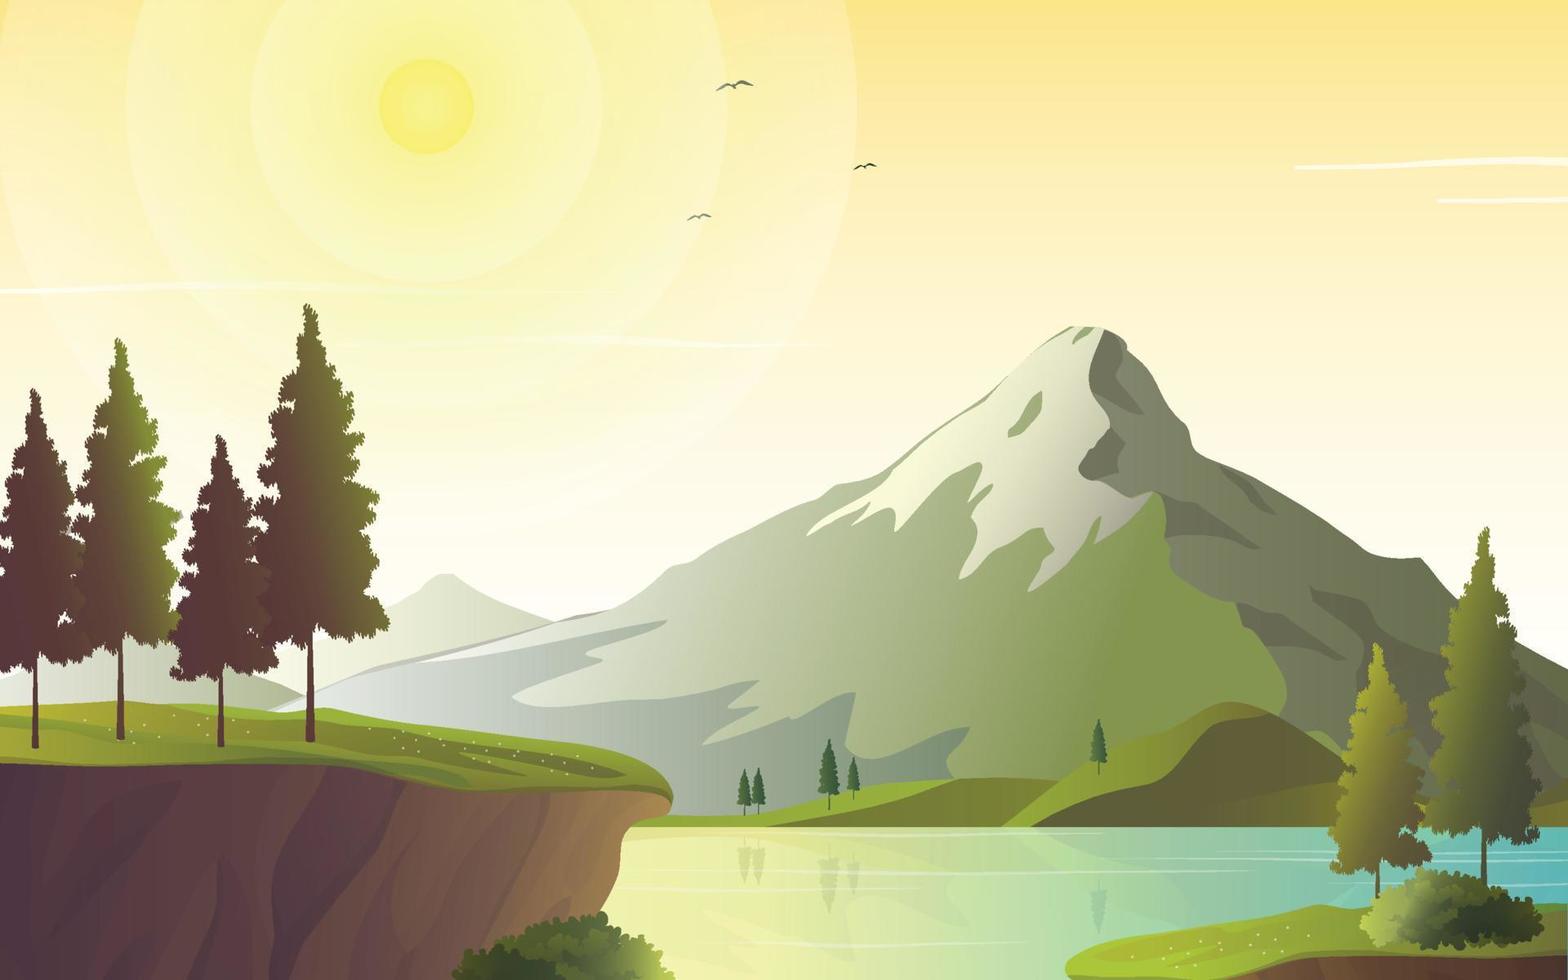 Nature Landscape and Scenery vector